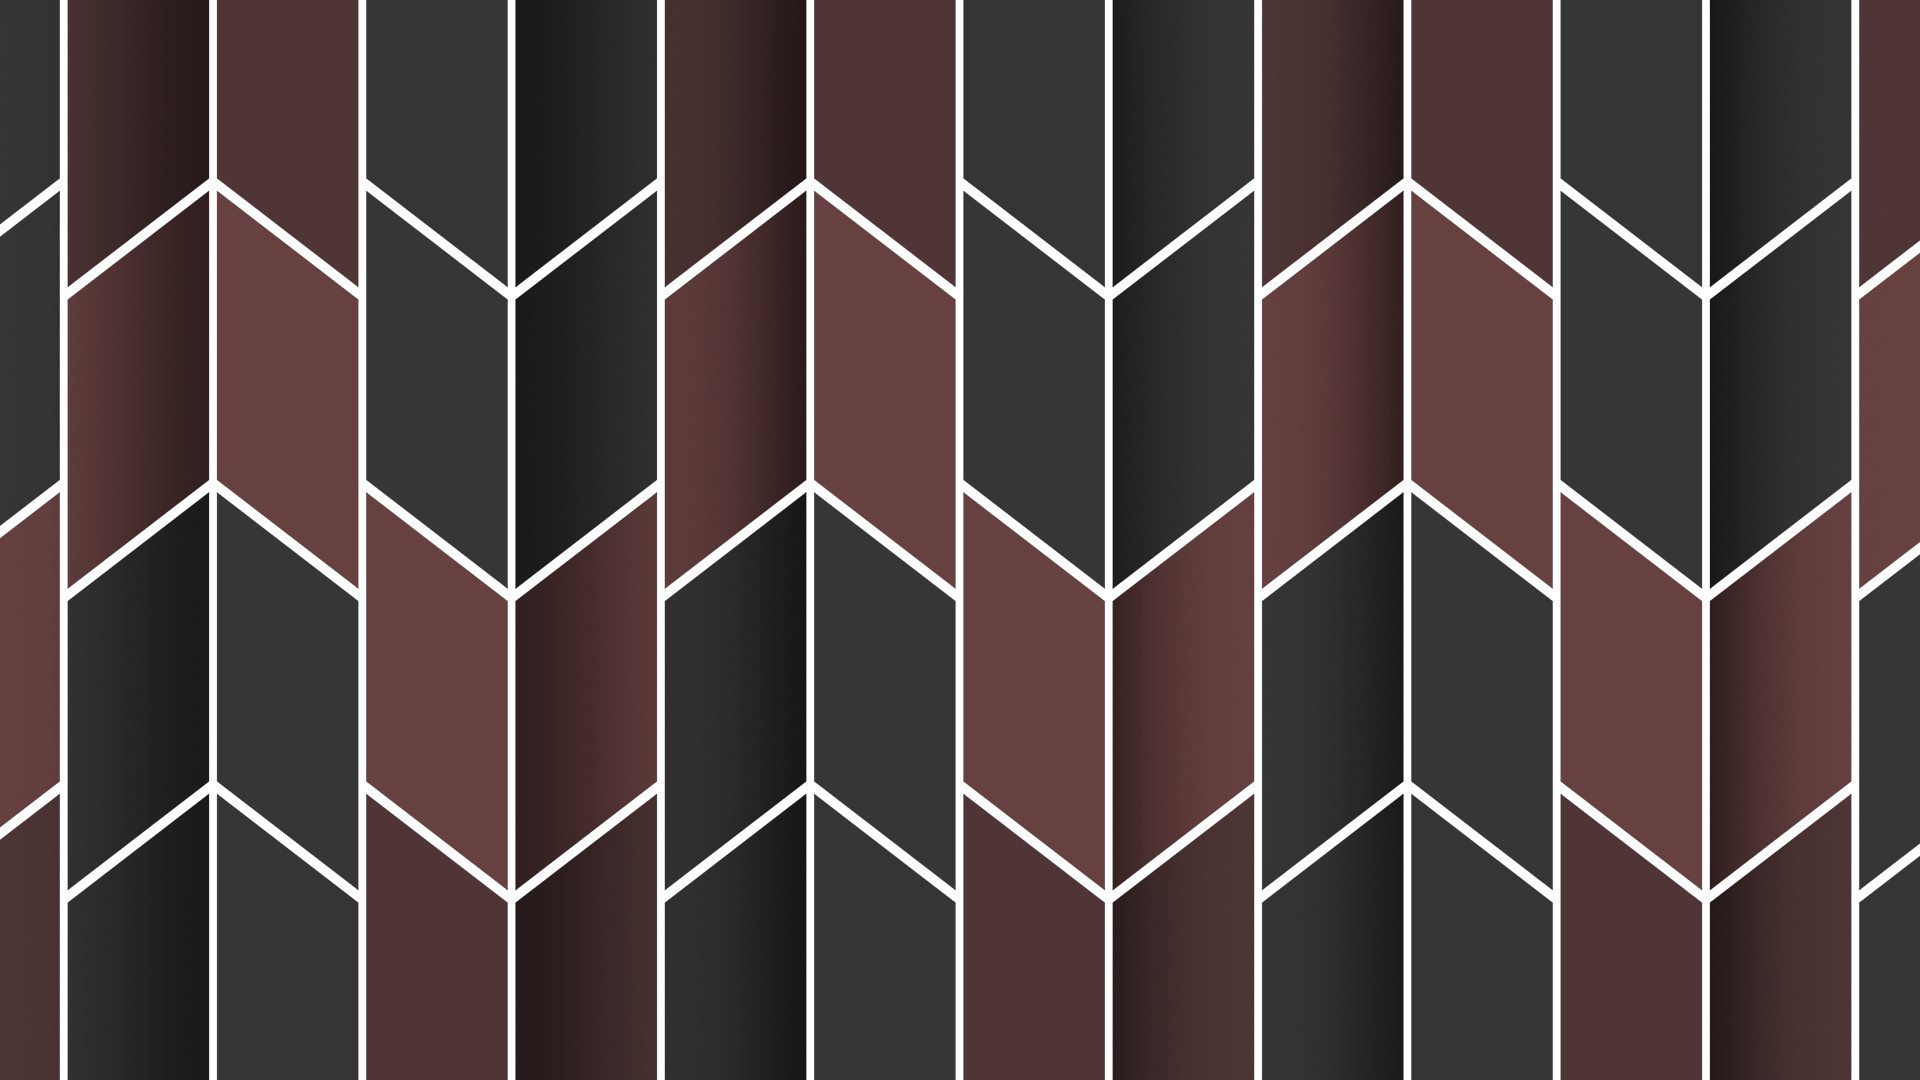 1920x1080, Tile, Simple, Pattern, Shapes Wallpapers - Hd Pattern Wallpapers 1080p Desktop - HD Wallpaper 